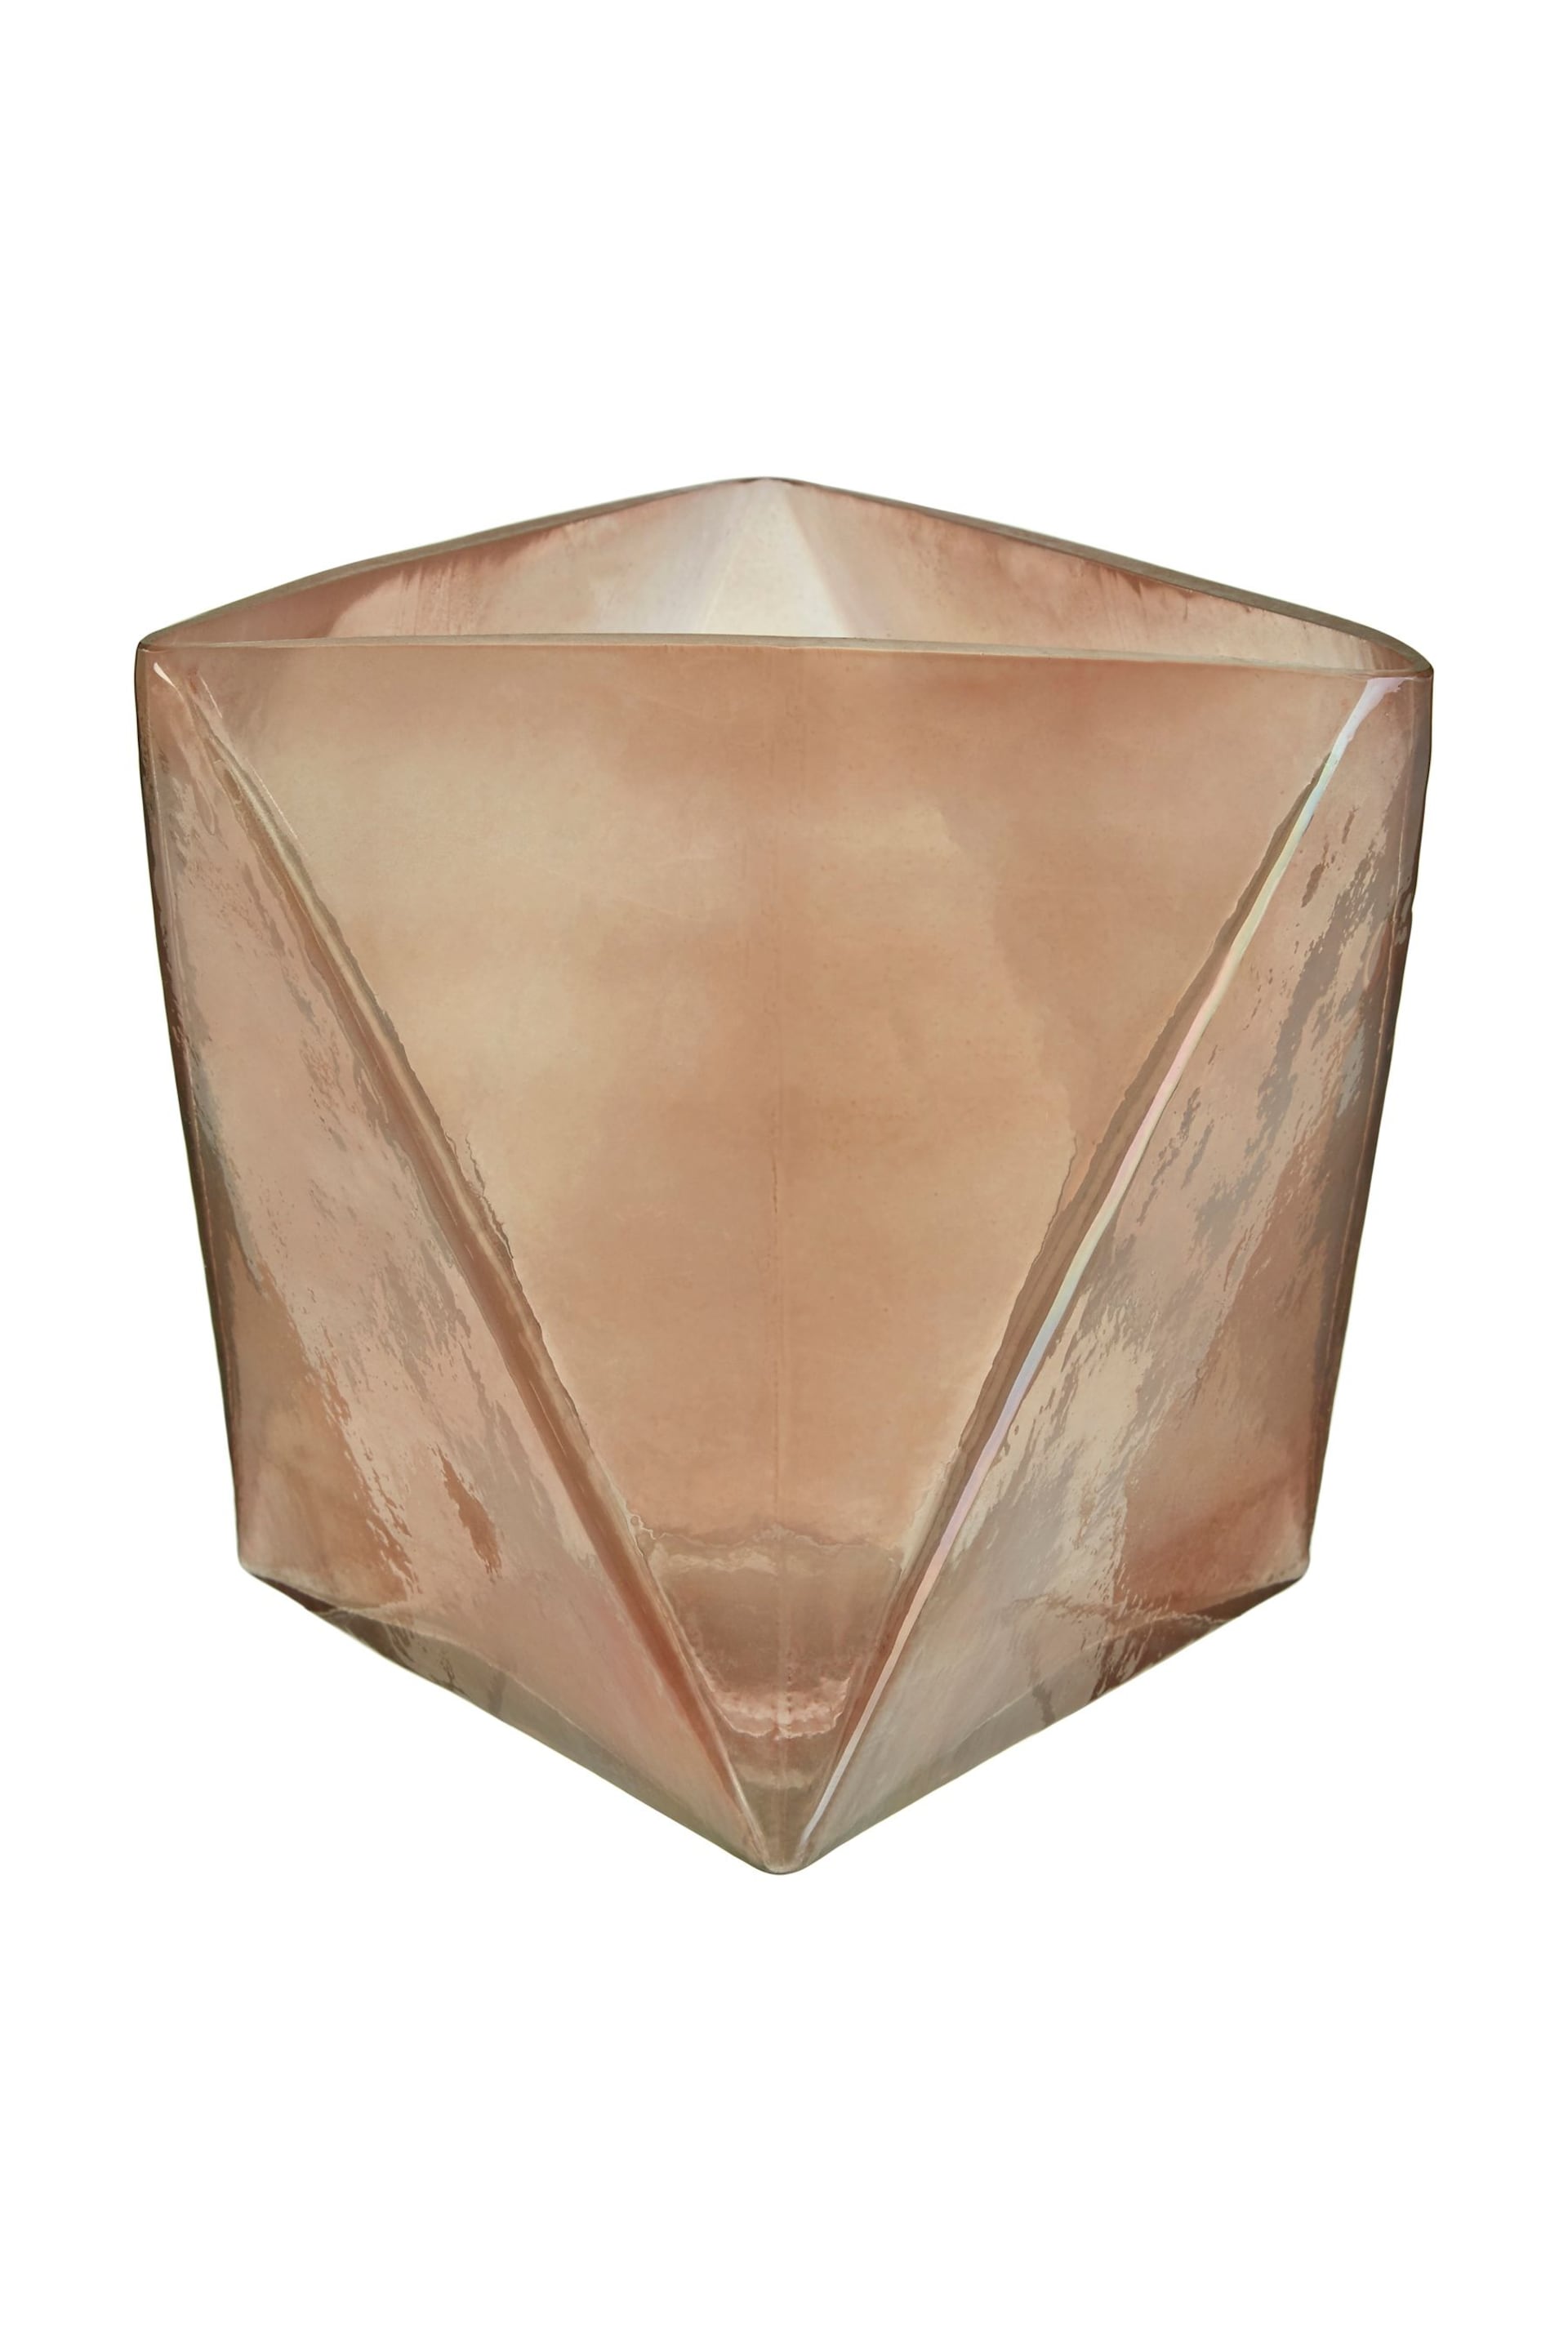 Fifty Five South Bronze Pink Candle Holder - Image 2 of 4